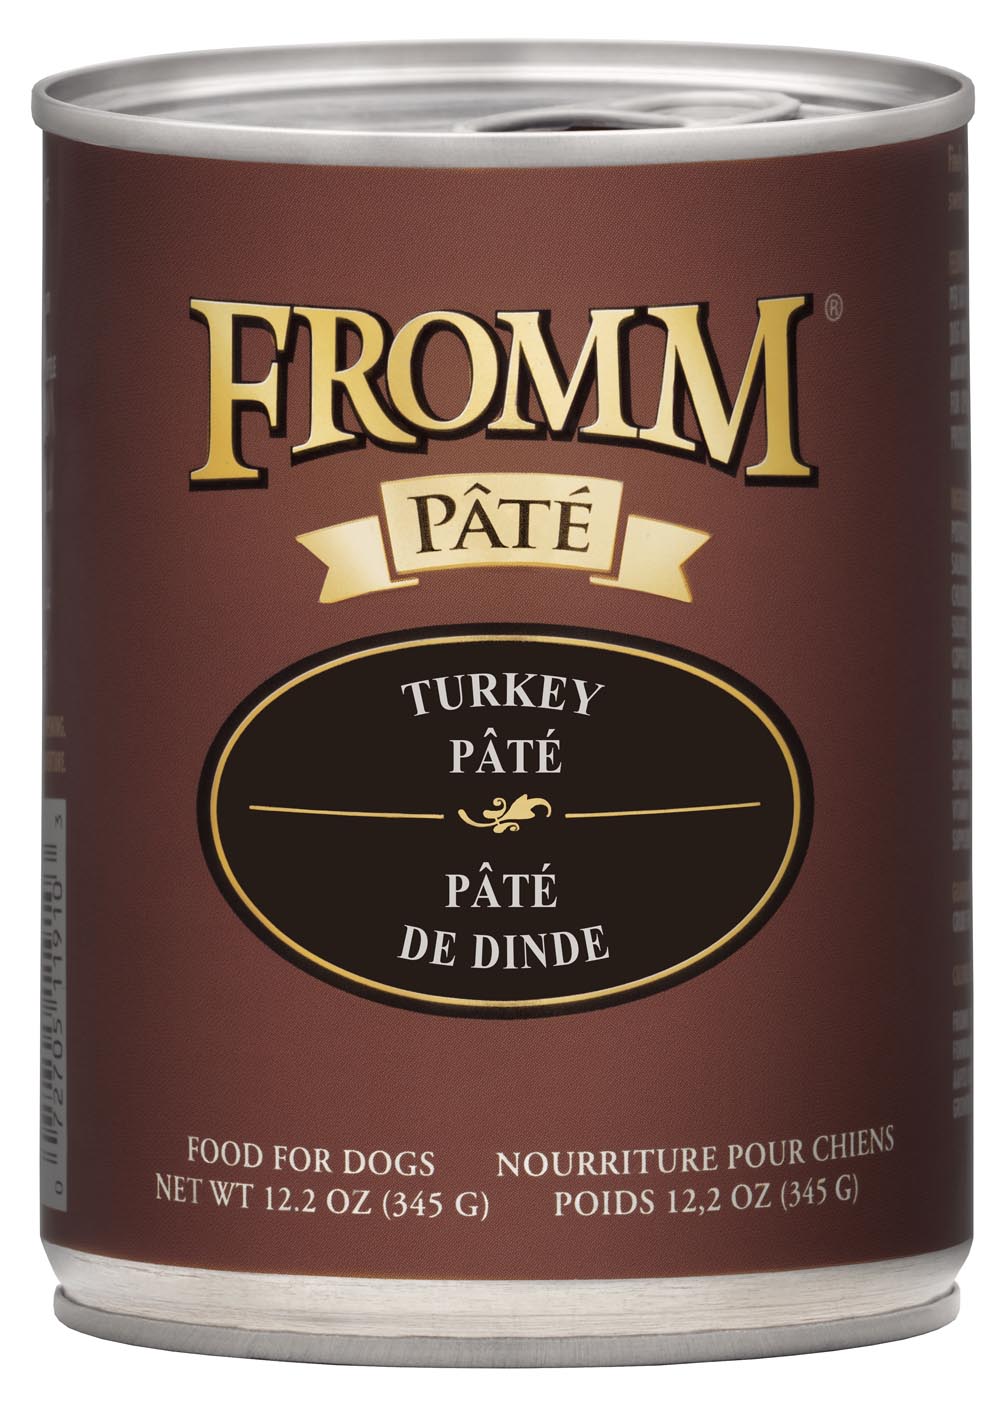 Fromm Turkey Pate Food for Dogs, 12.2 OZ